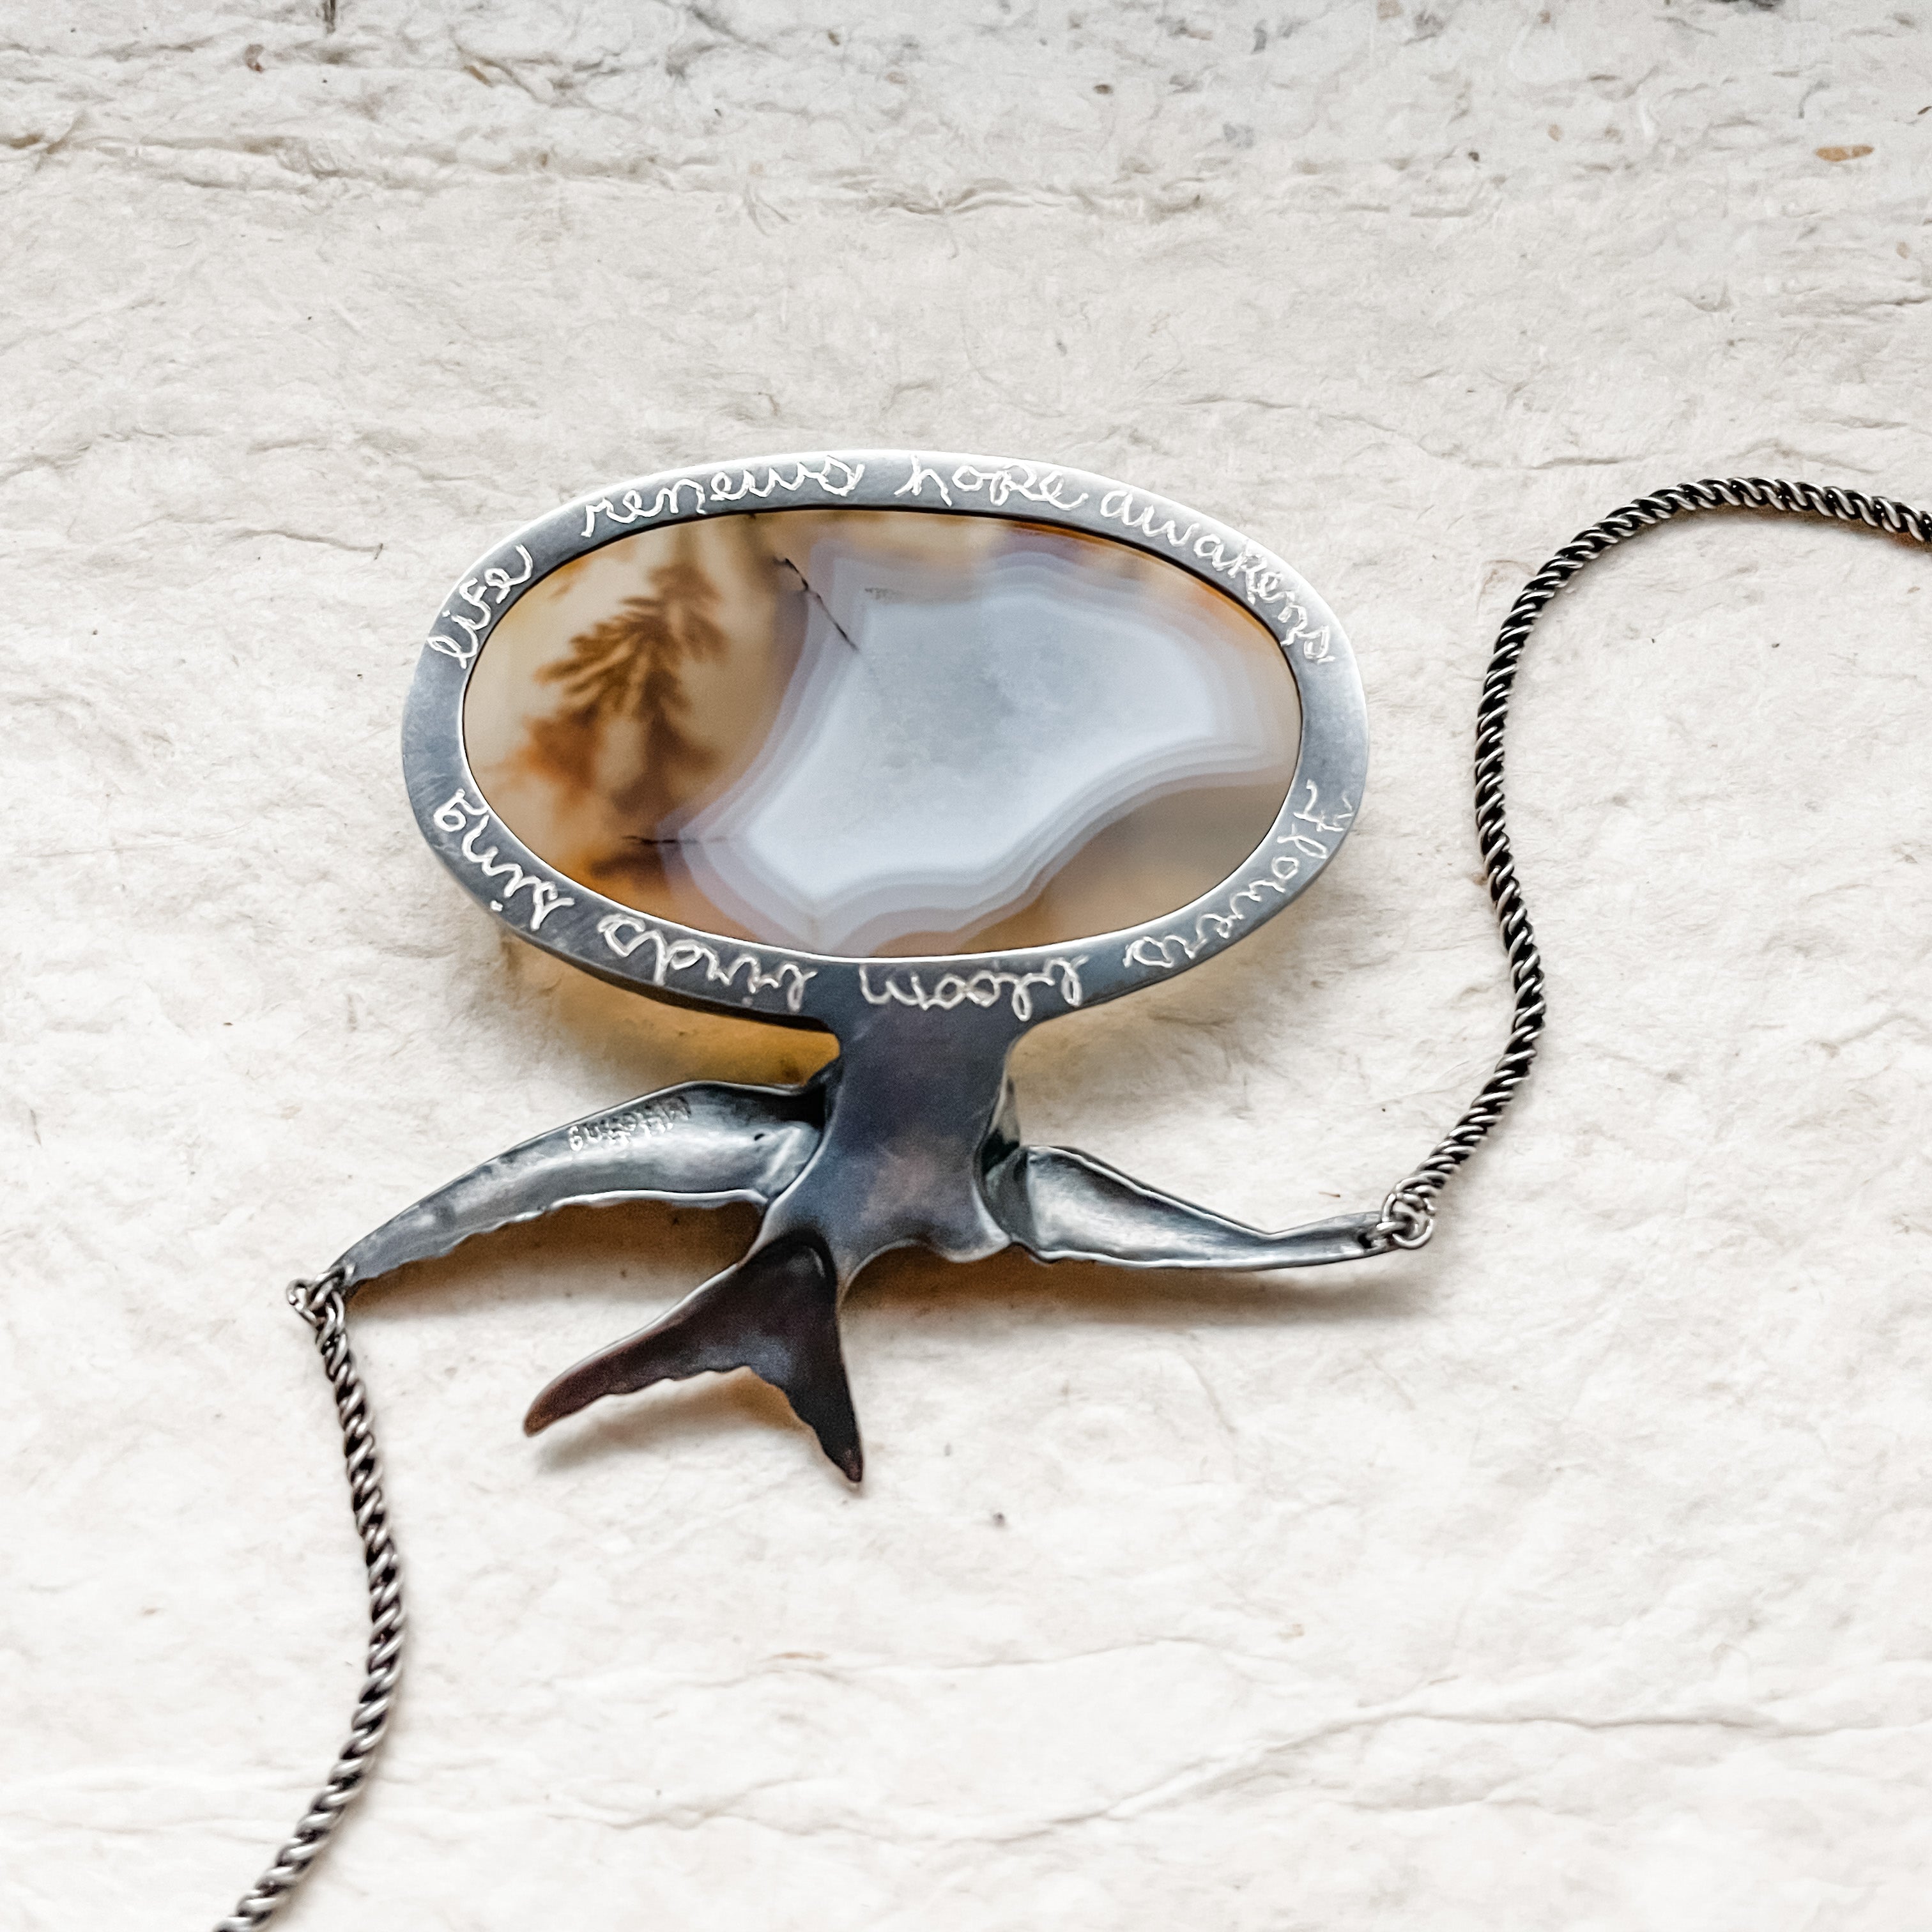 Swallow Dendritic Agate Necklace